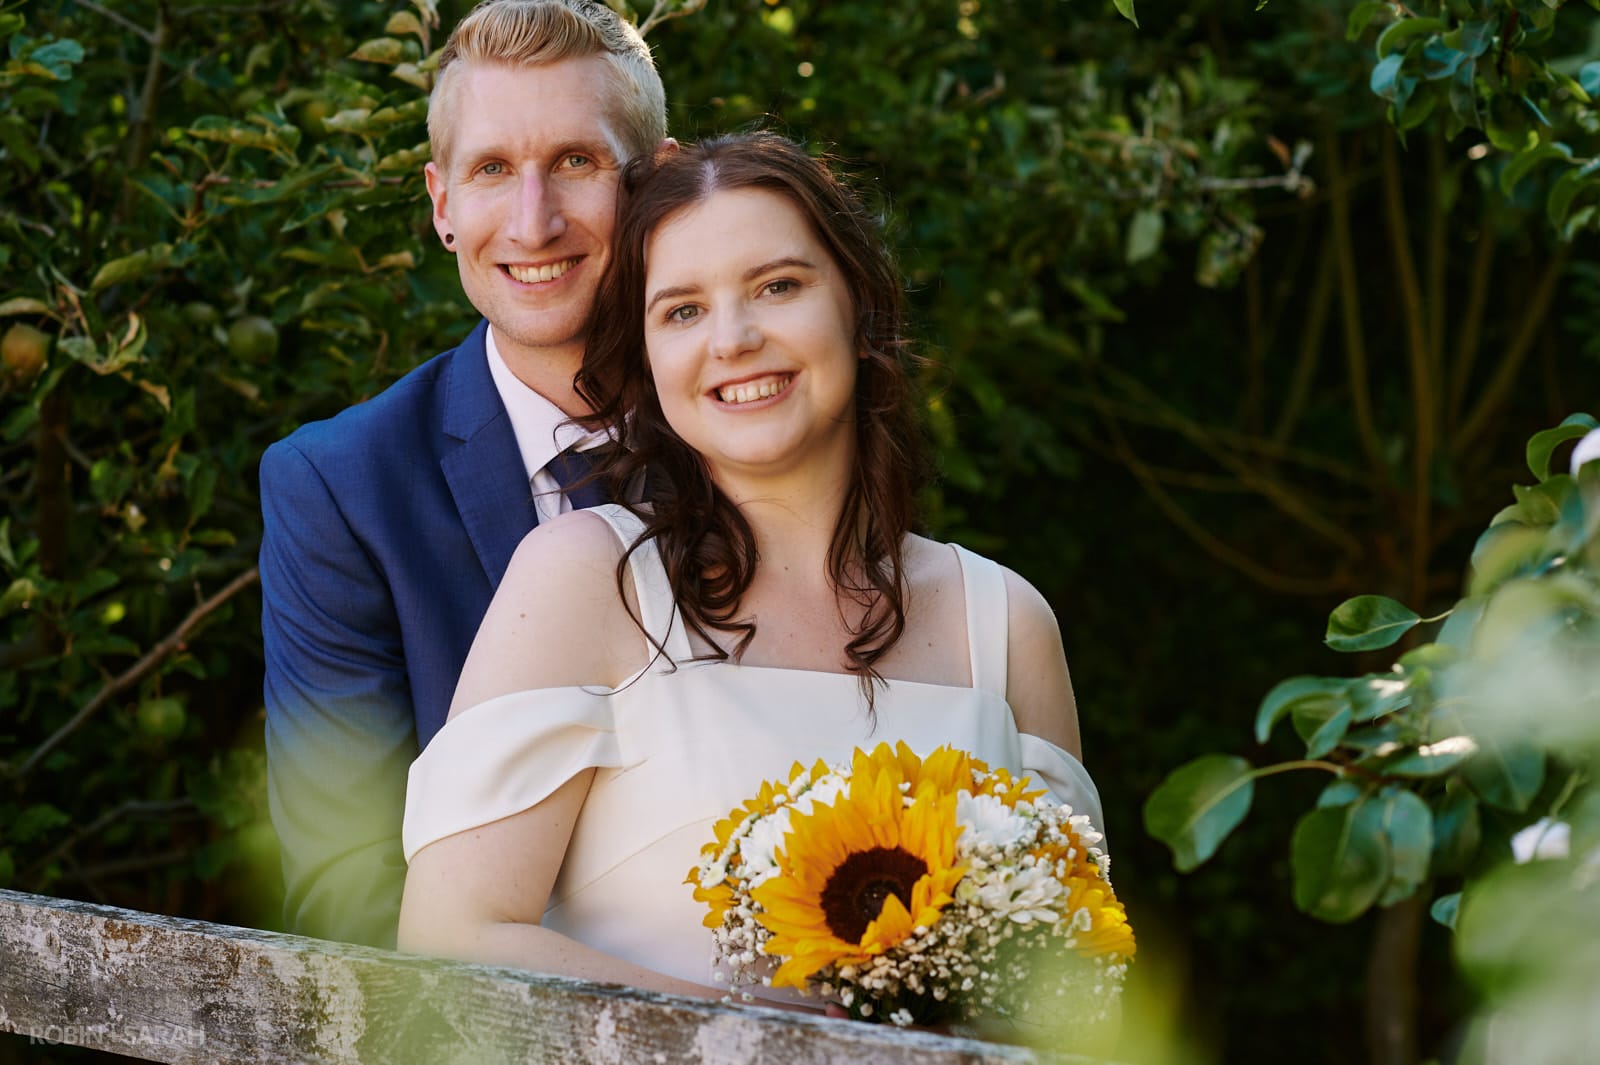 Bride and groom together in gardens at DIY wedding held at their home